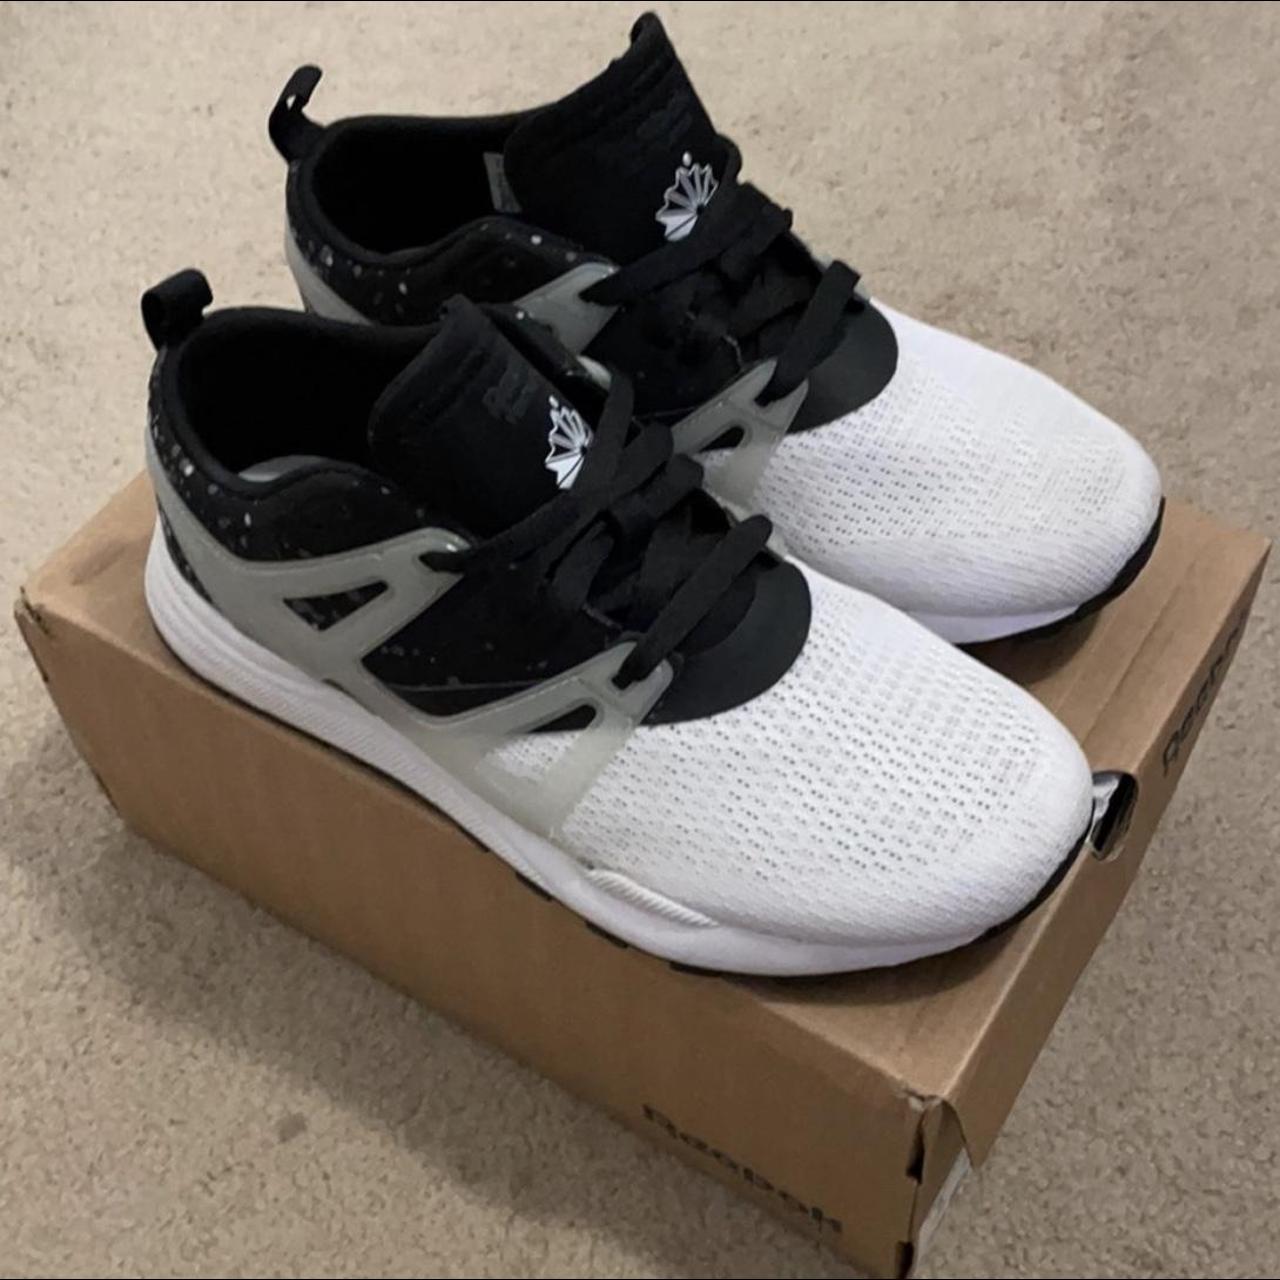 Reebok Women's Black and White Trainers